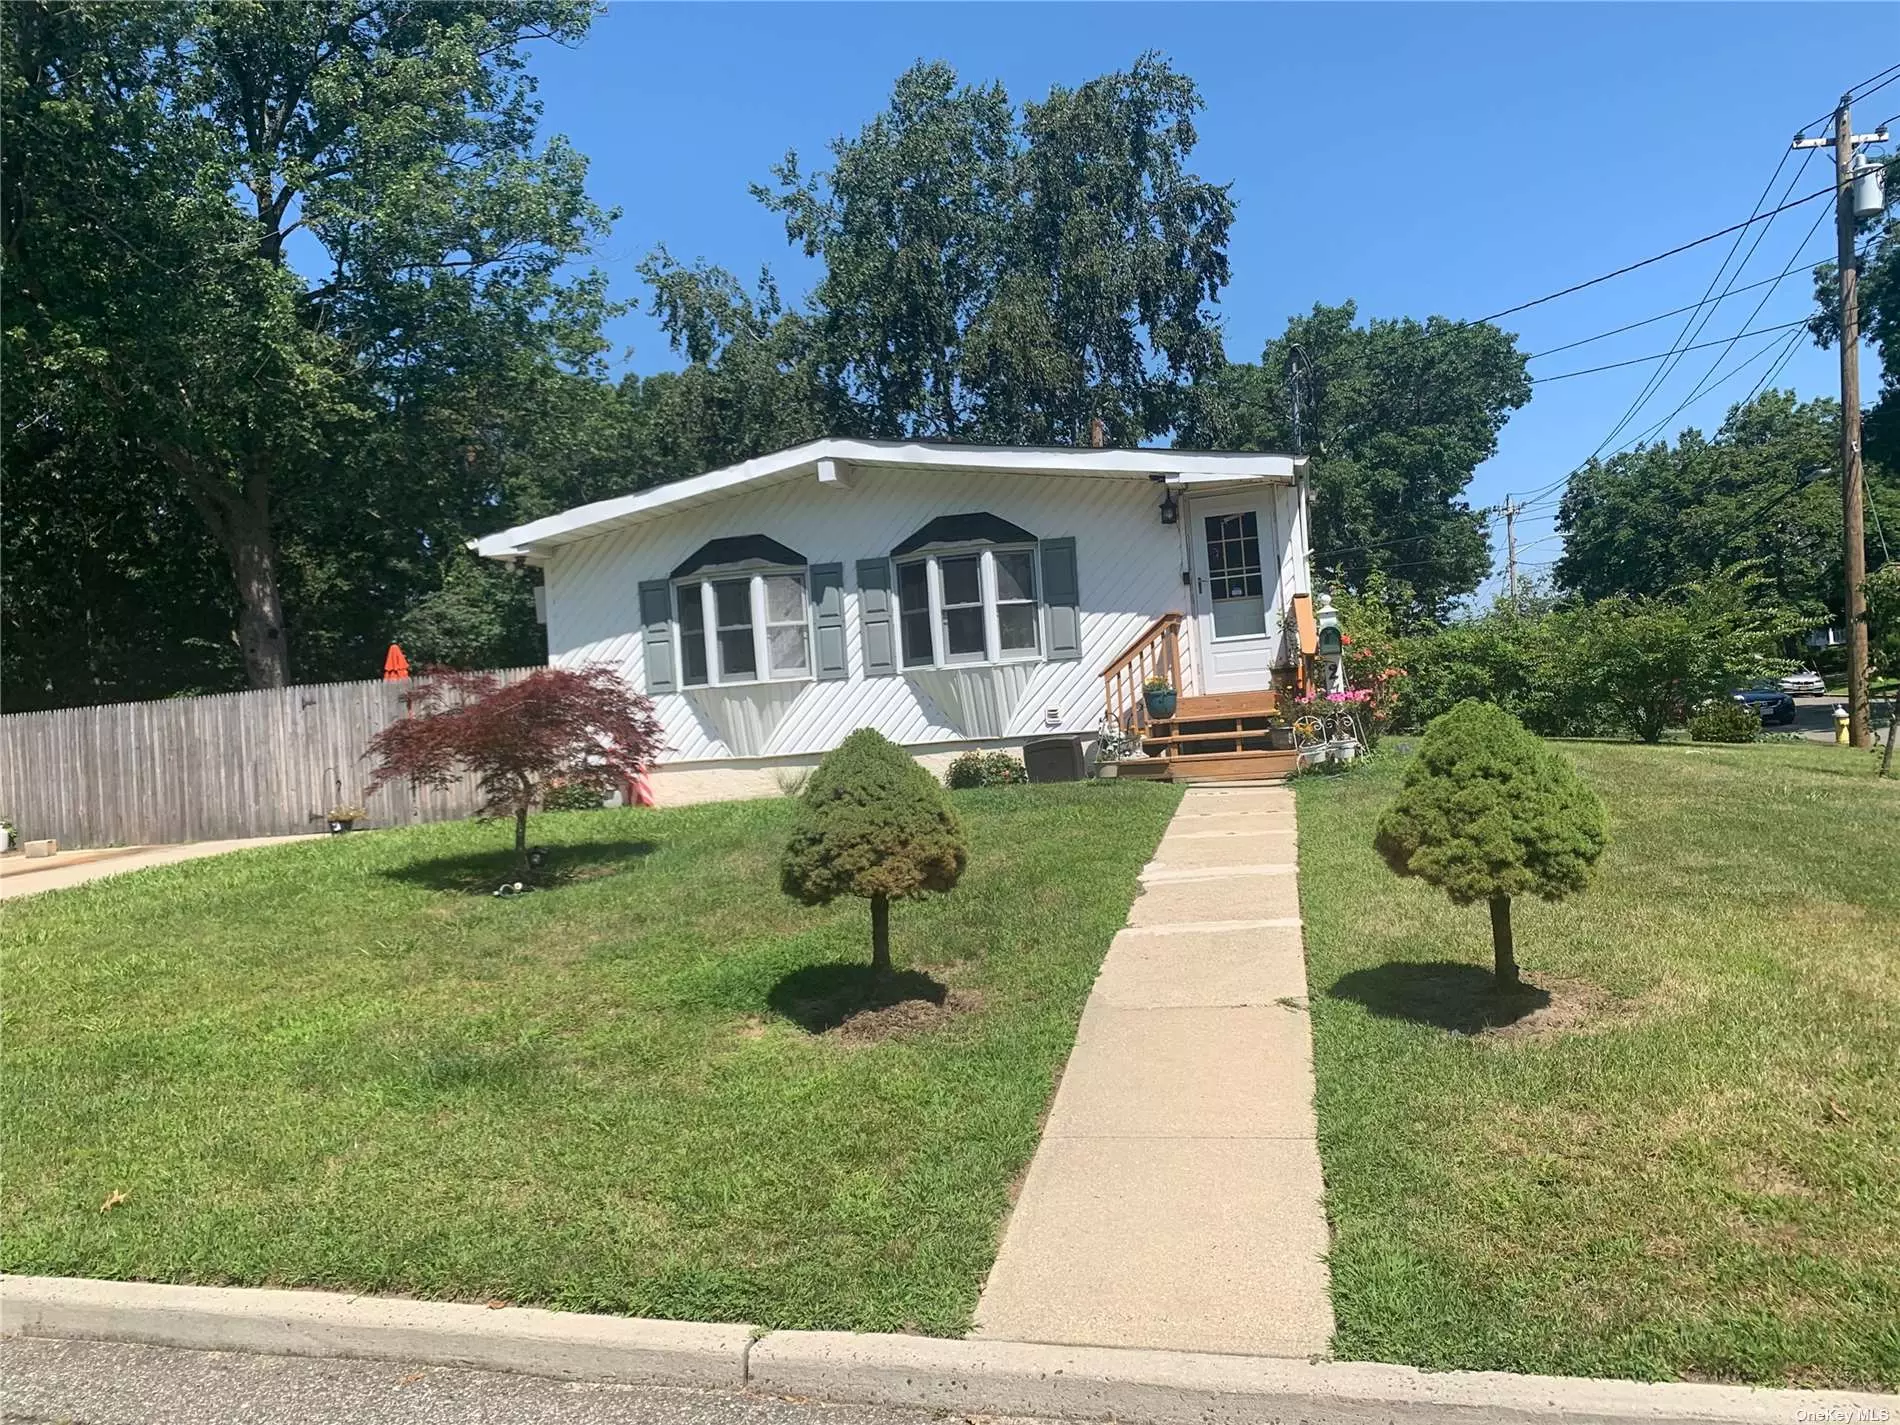 Welcome home! Wood floors, updated kitchen, flat yard, corner house on a cul-de-sac, LOW taxes, what more could you want. Lower level has outside entrance. Just unpack and move right in.